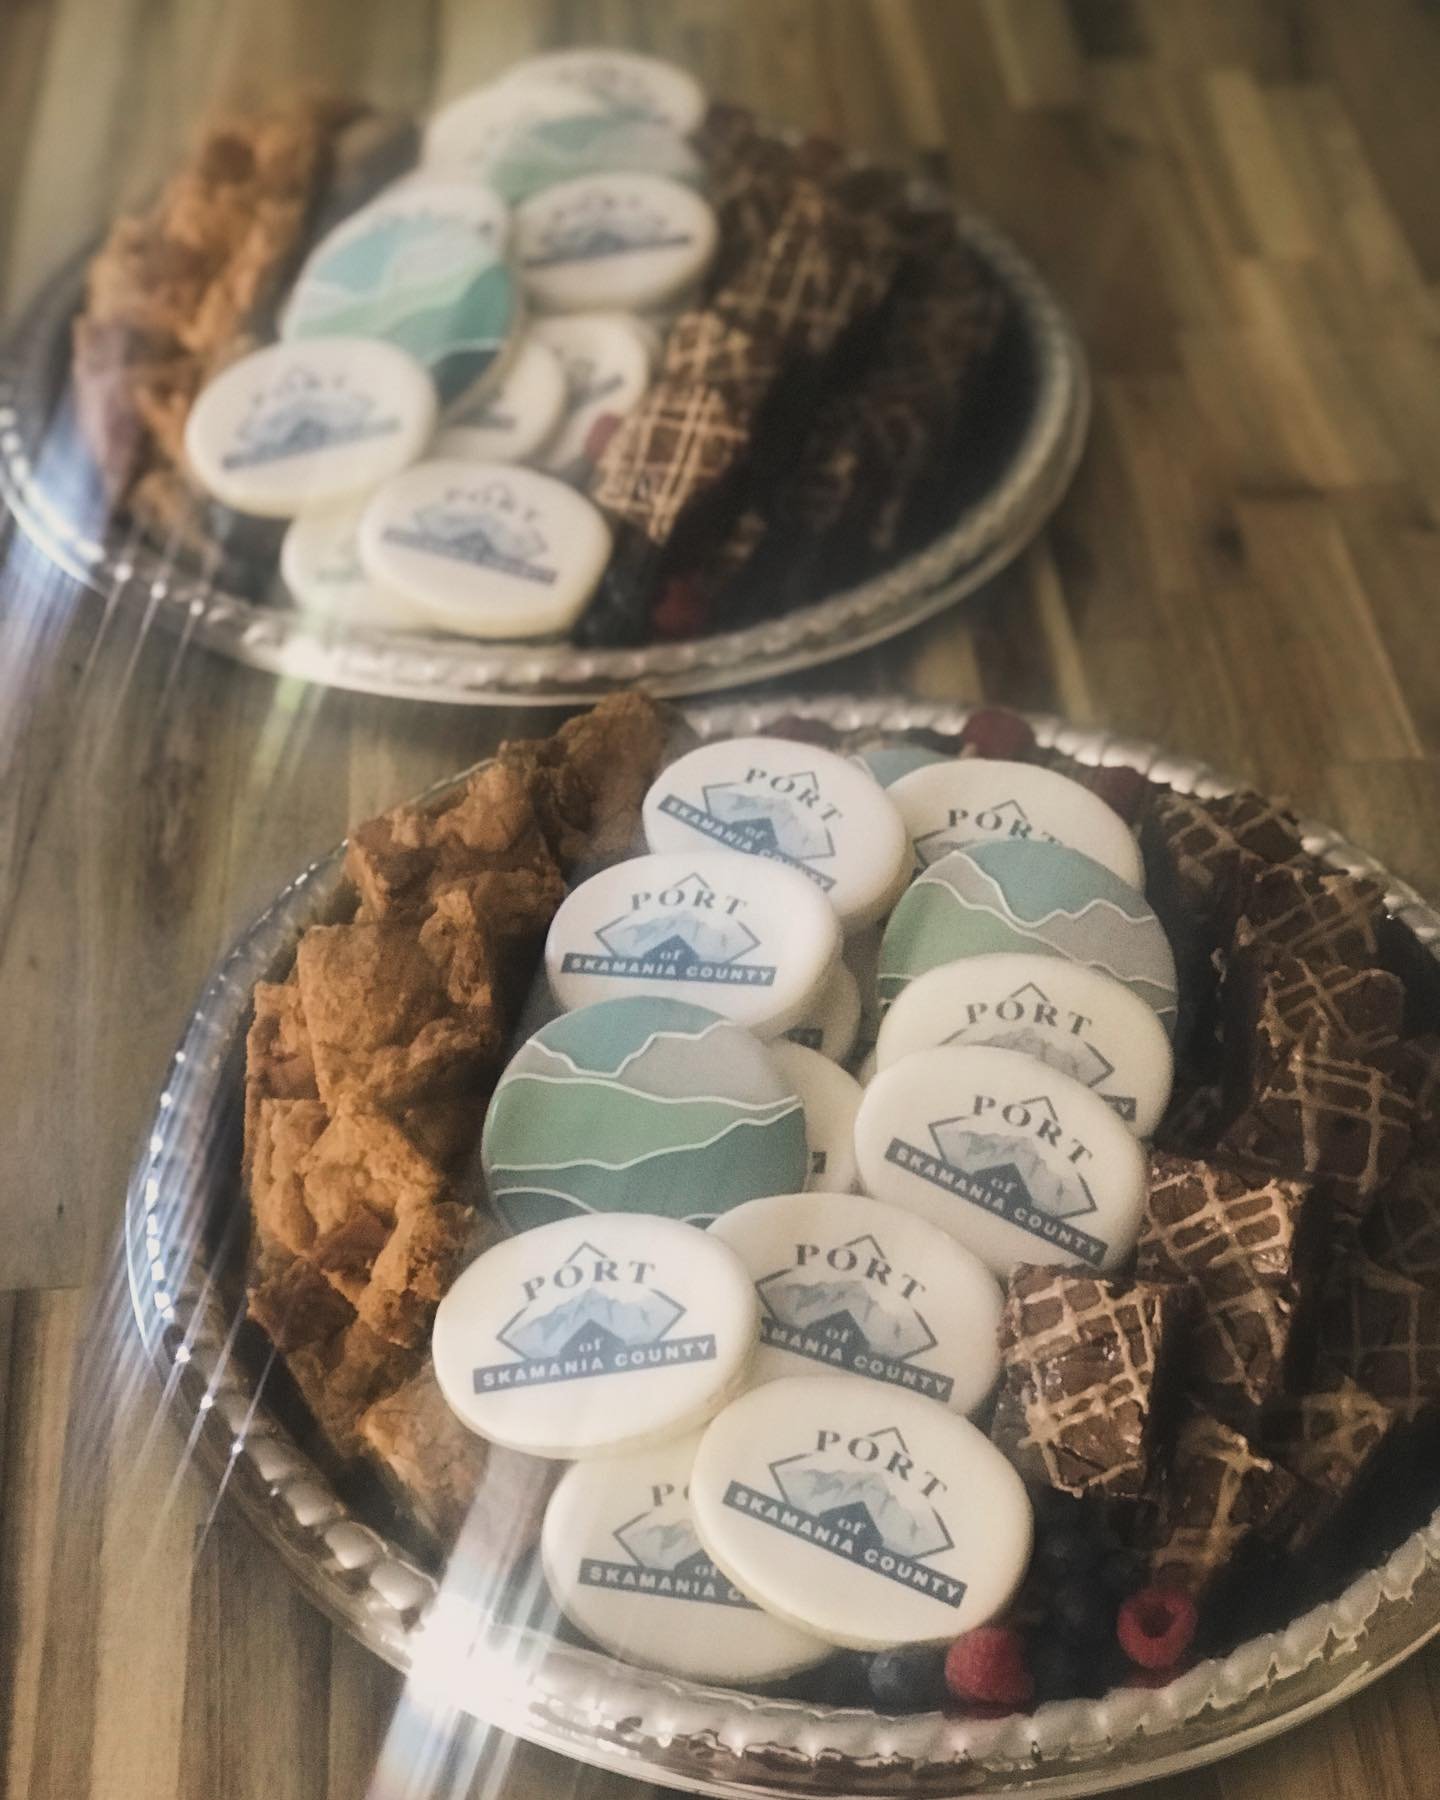 Sweet treats headed out for a Port event. 
Biscoff Cooke Butter blondes 
Salted Caramel Brownies and 
Port of Skamania County Logo Cookies. 

The tray decided to cast a glare, so I decided to just roll with it. Shine on.